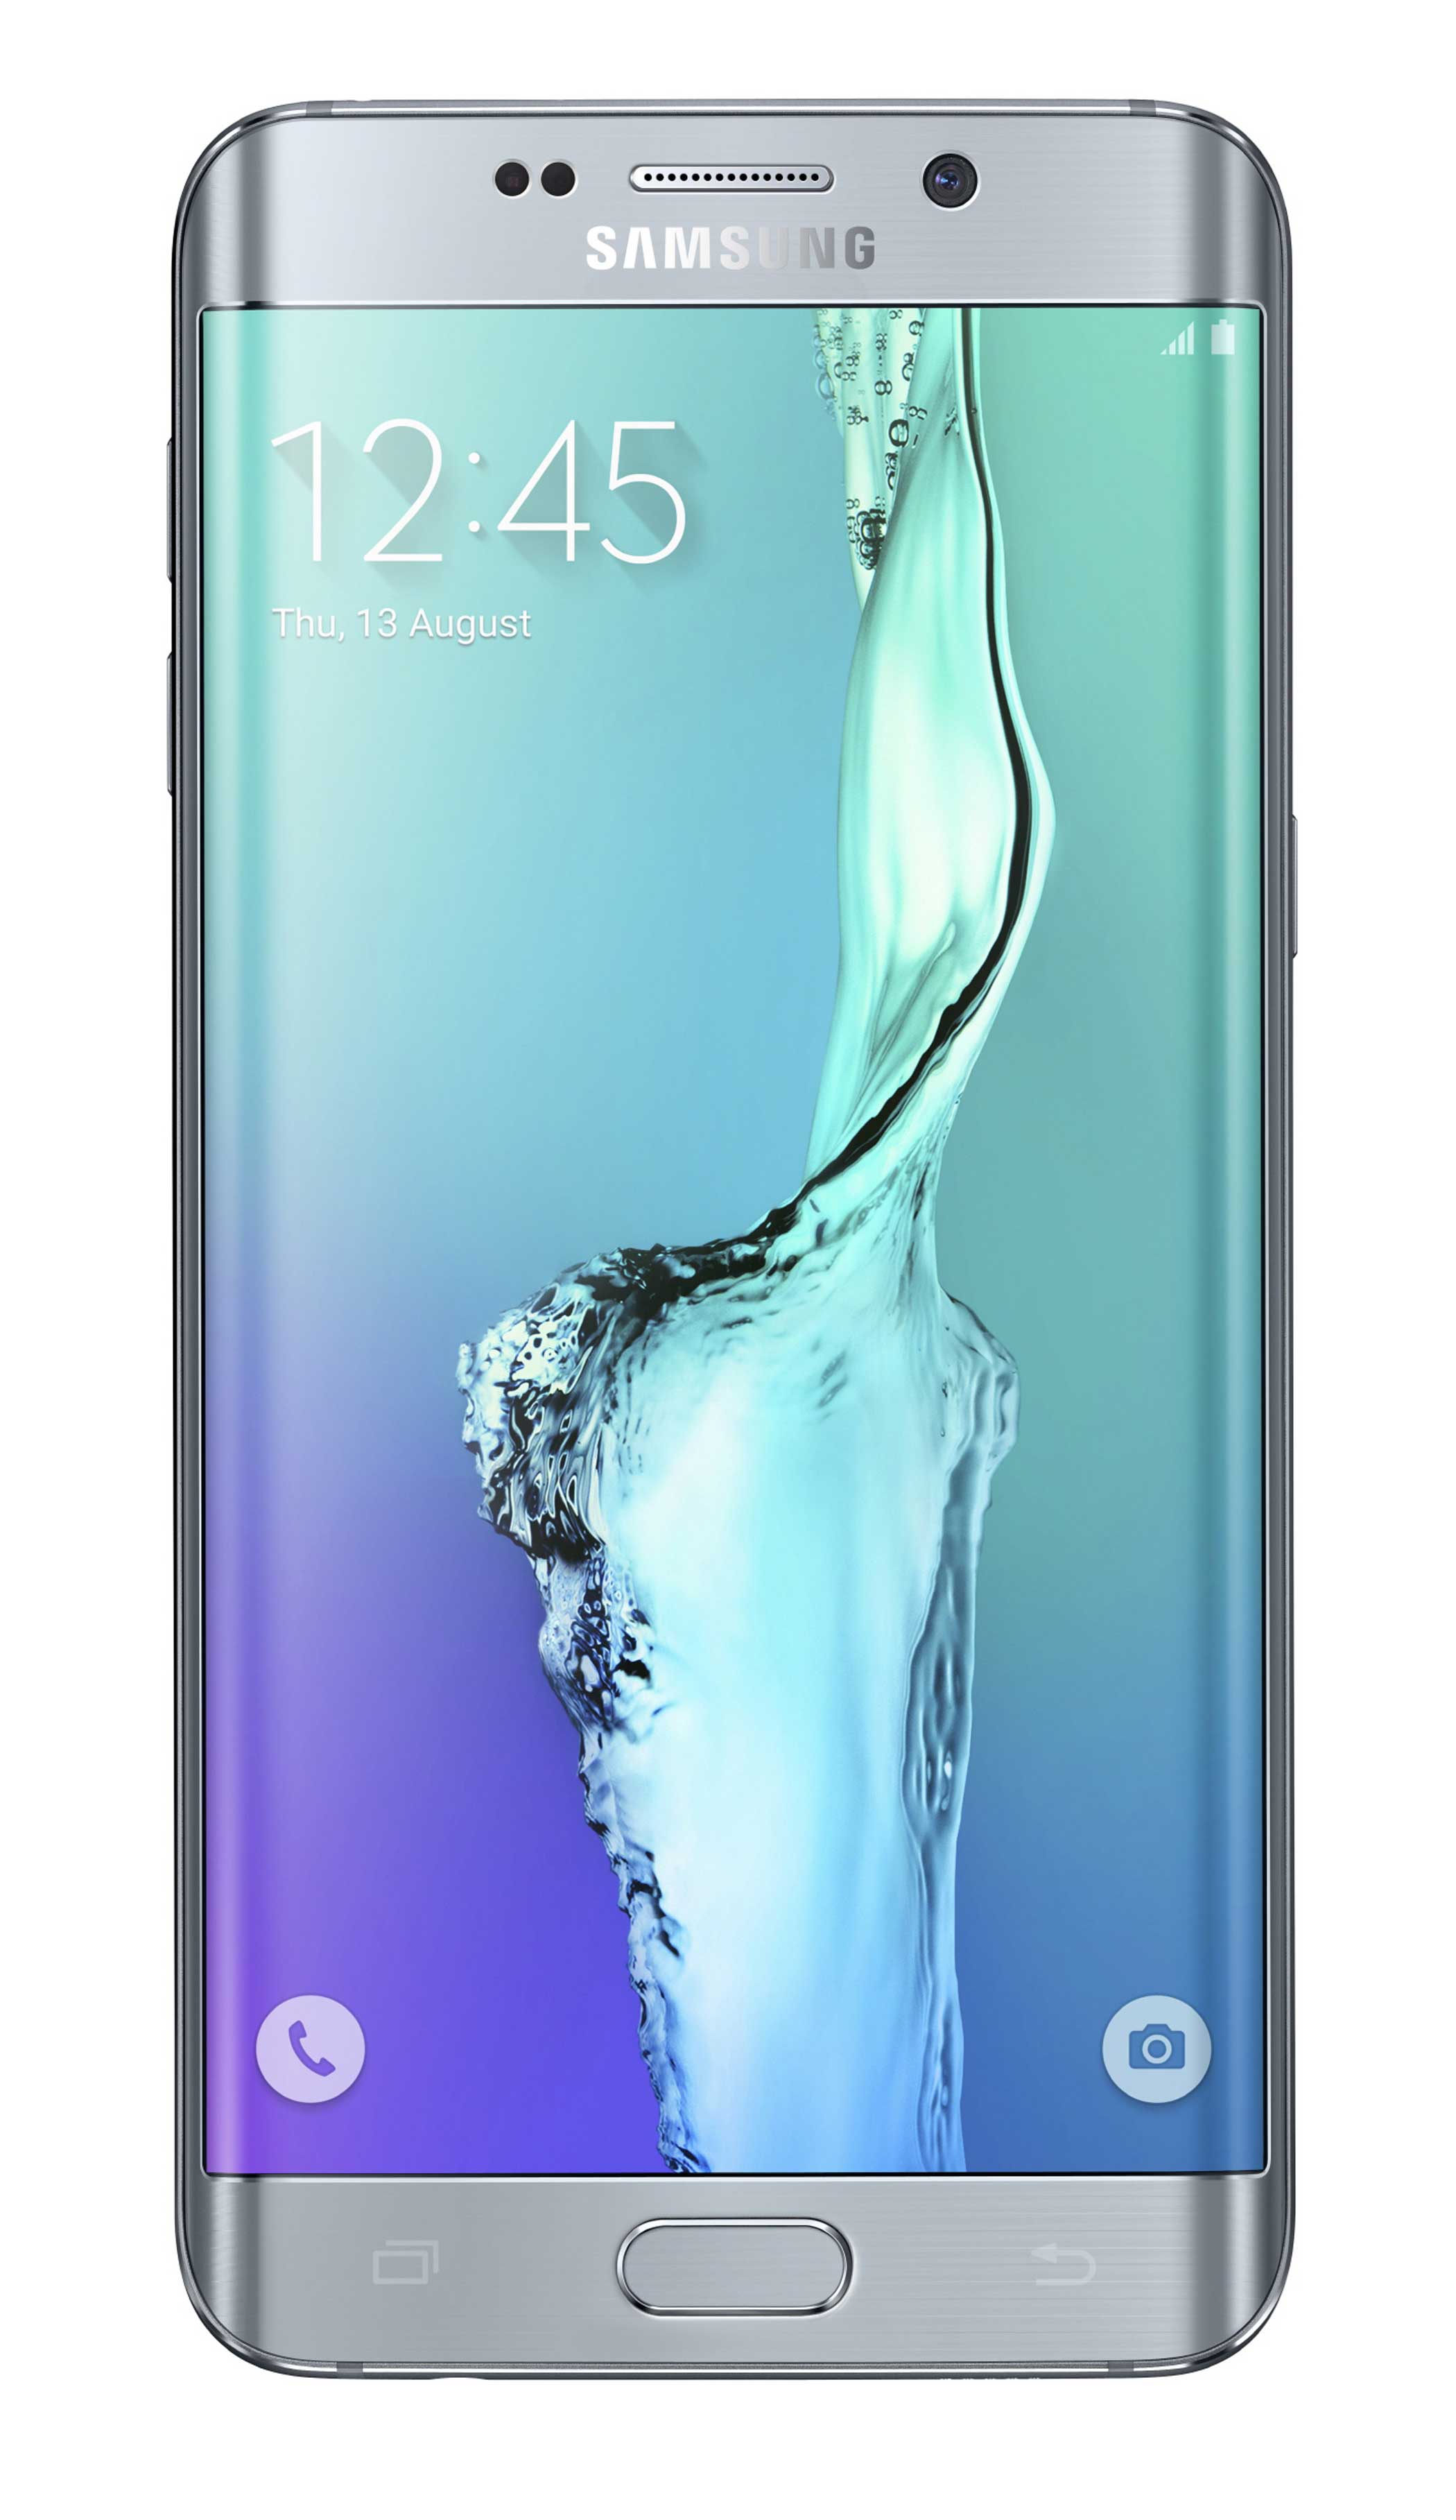 Galaxy S6 Edge+: The new Edge+ features a curved screen, a 5.7-inch display and new software features like the ability to directly livestream video recordings to  YouTube